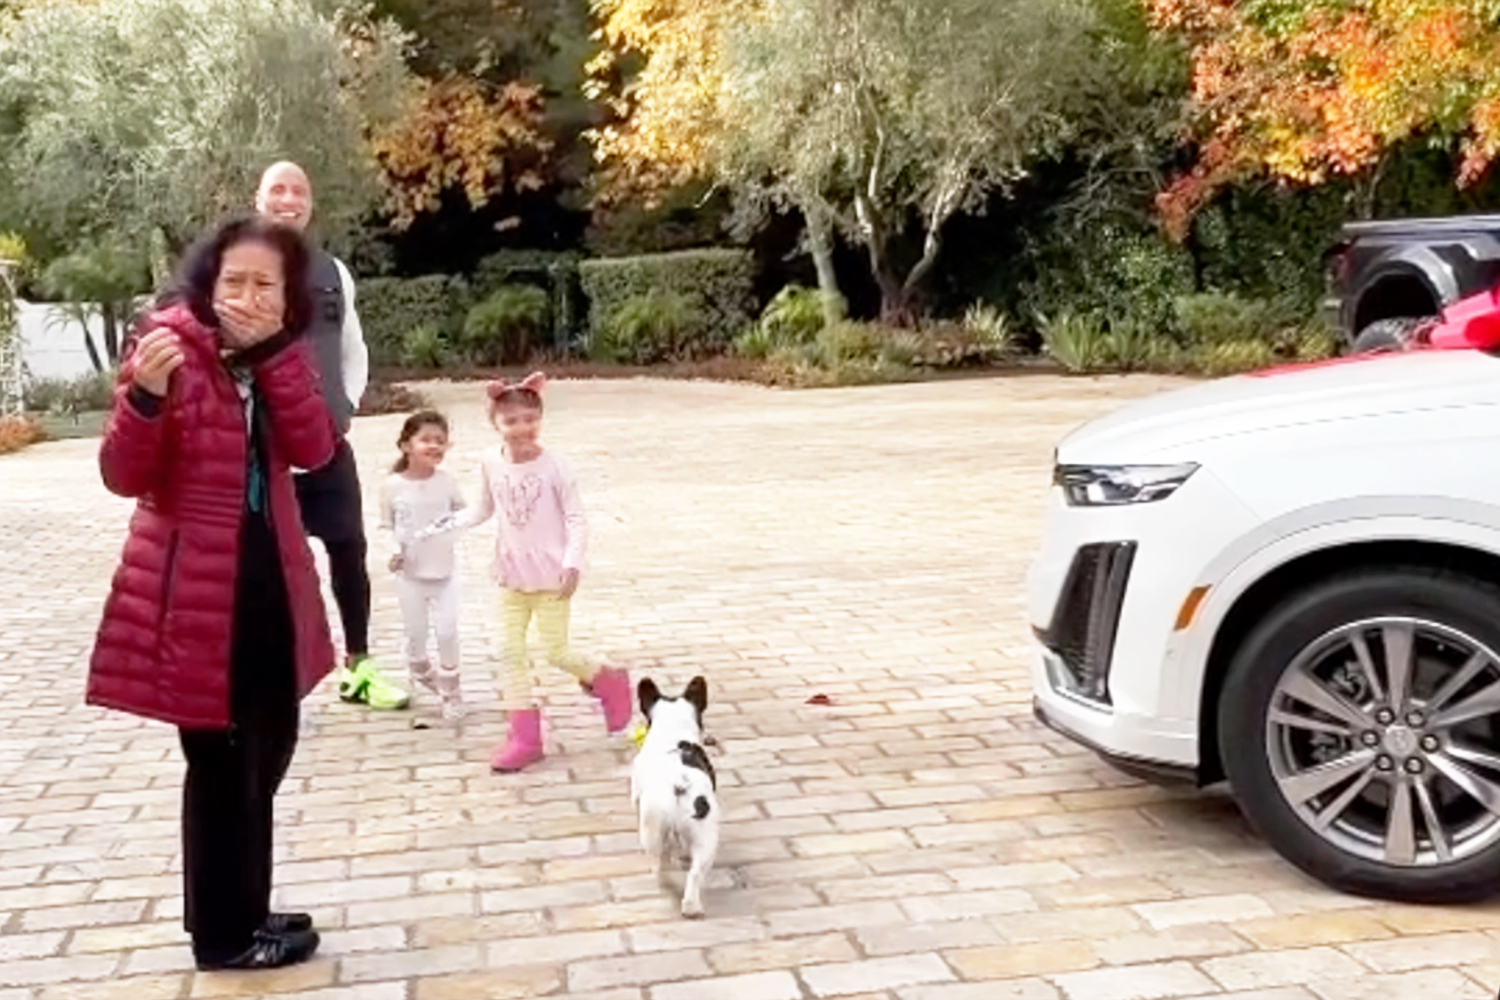 Dwayne "The Rock" Johnson Surprises His Mom With New Car on Christmas